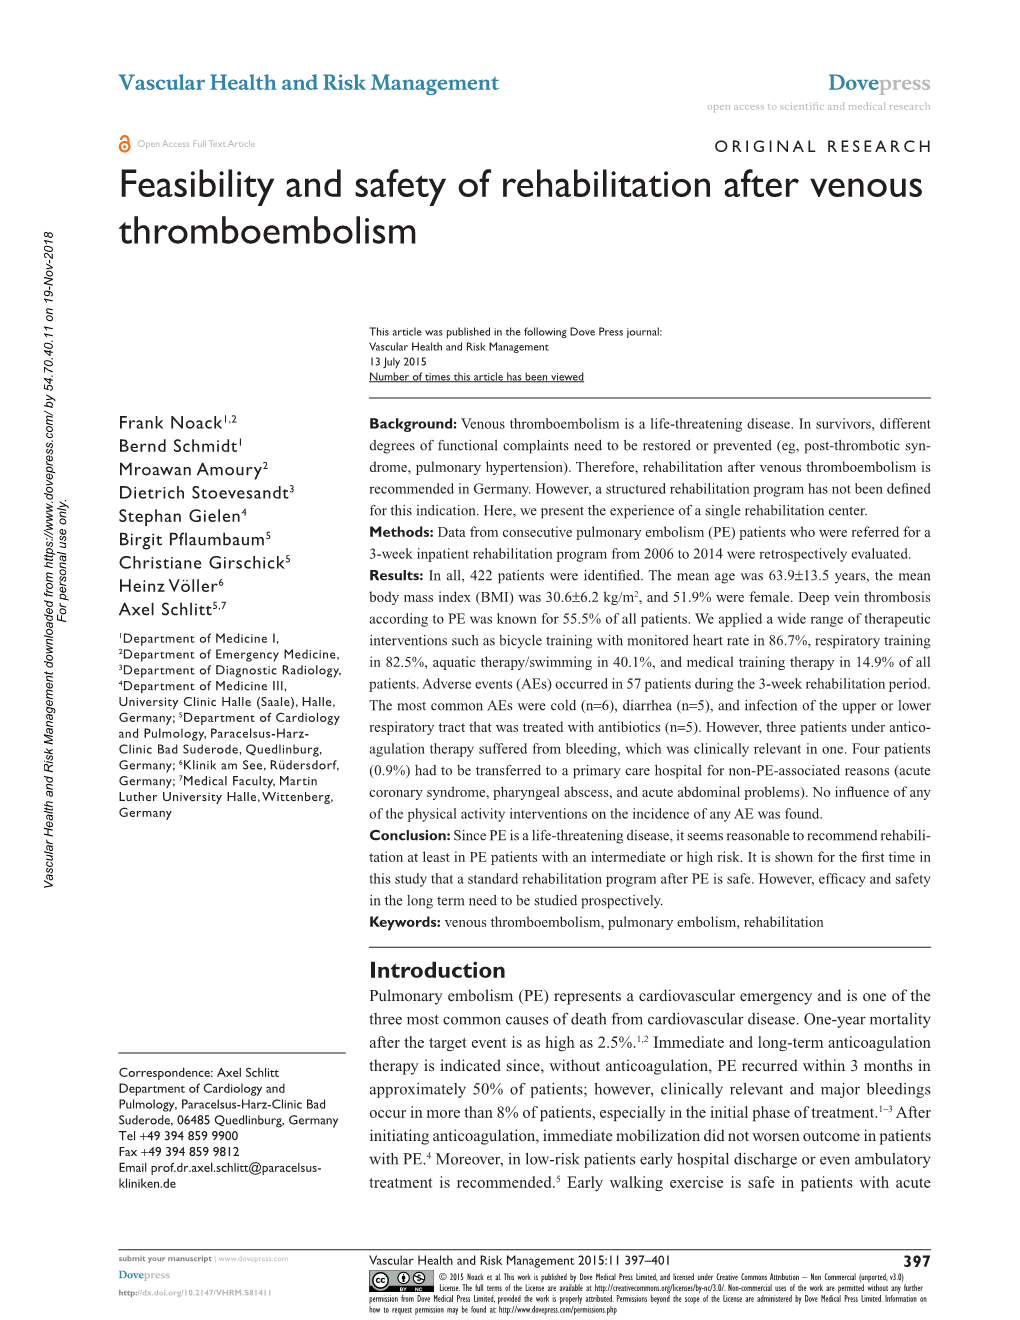 Feasibility and Safety of Rehabilitation After Venous Thromboembolism